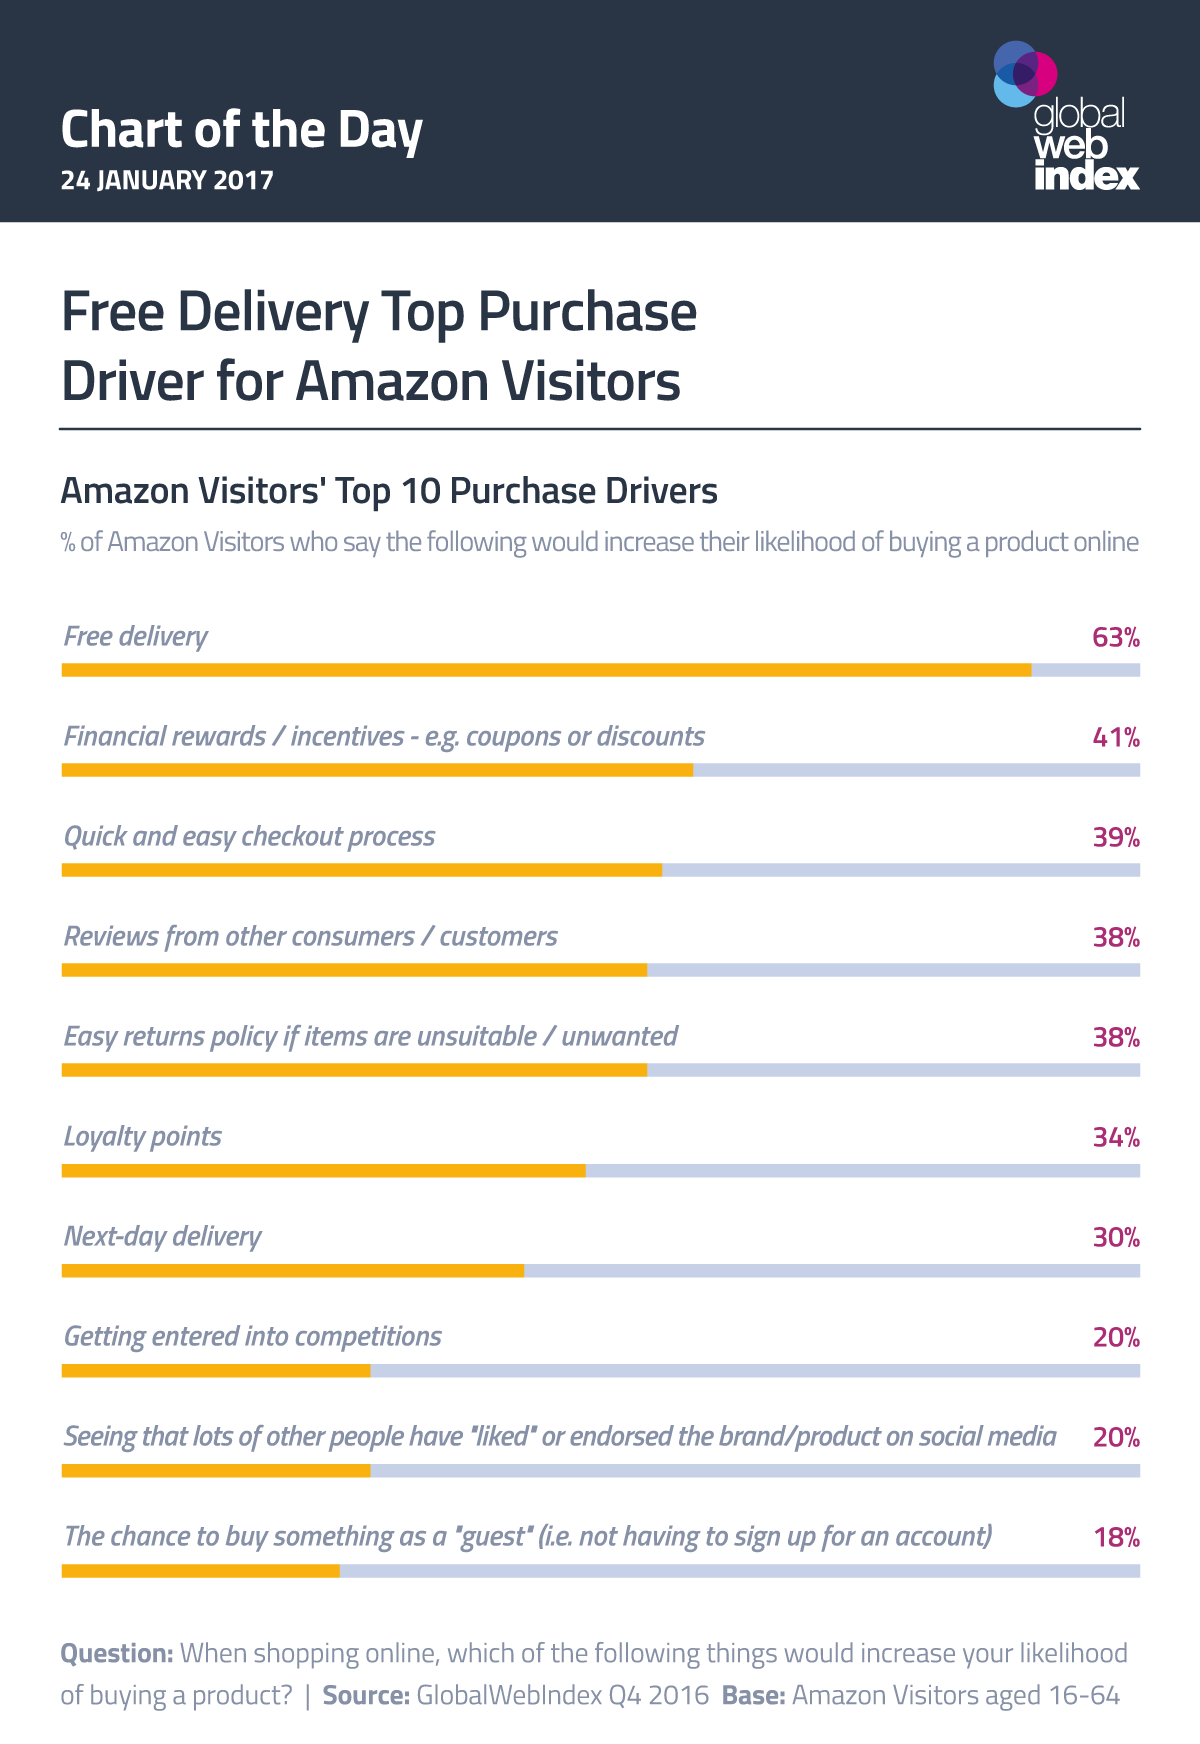 Free Delivery Top Purchase Driver for Amazon Visitors